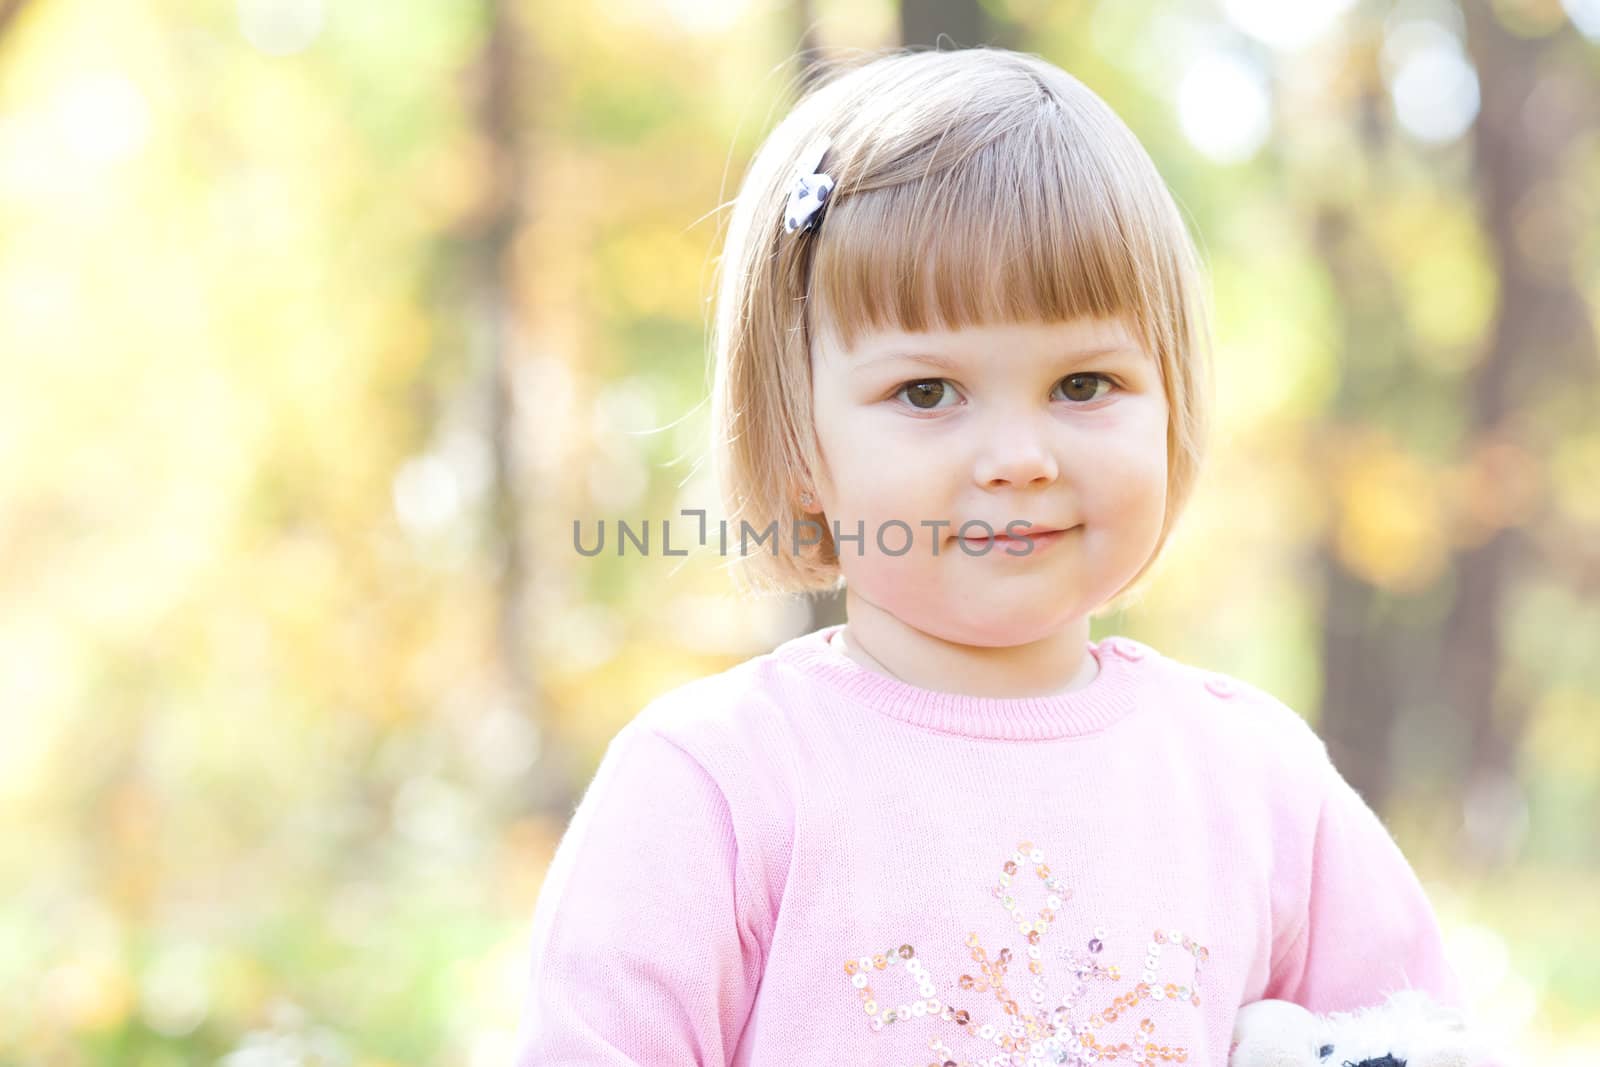 beautiful little girl on the autumn forest by jannyjus